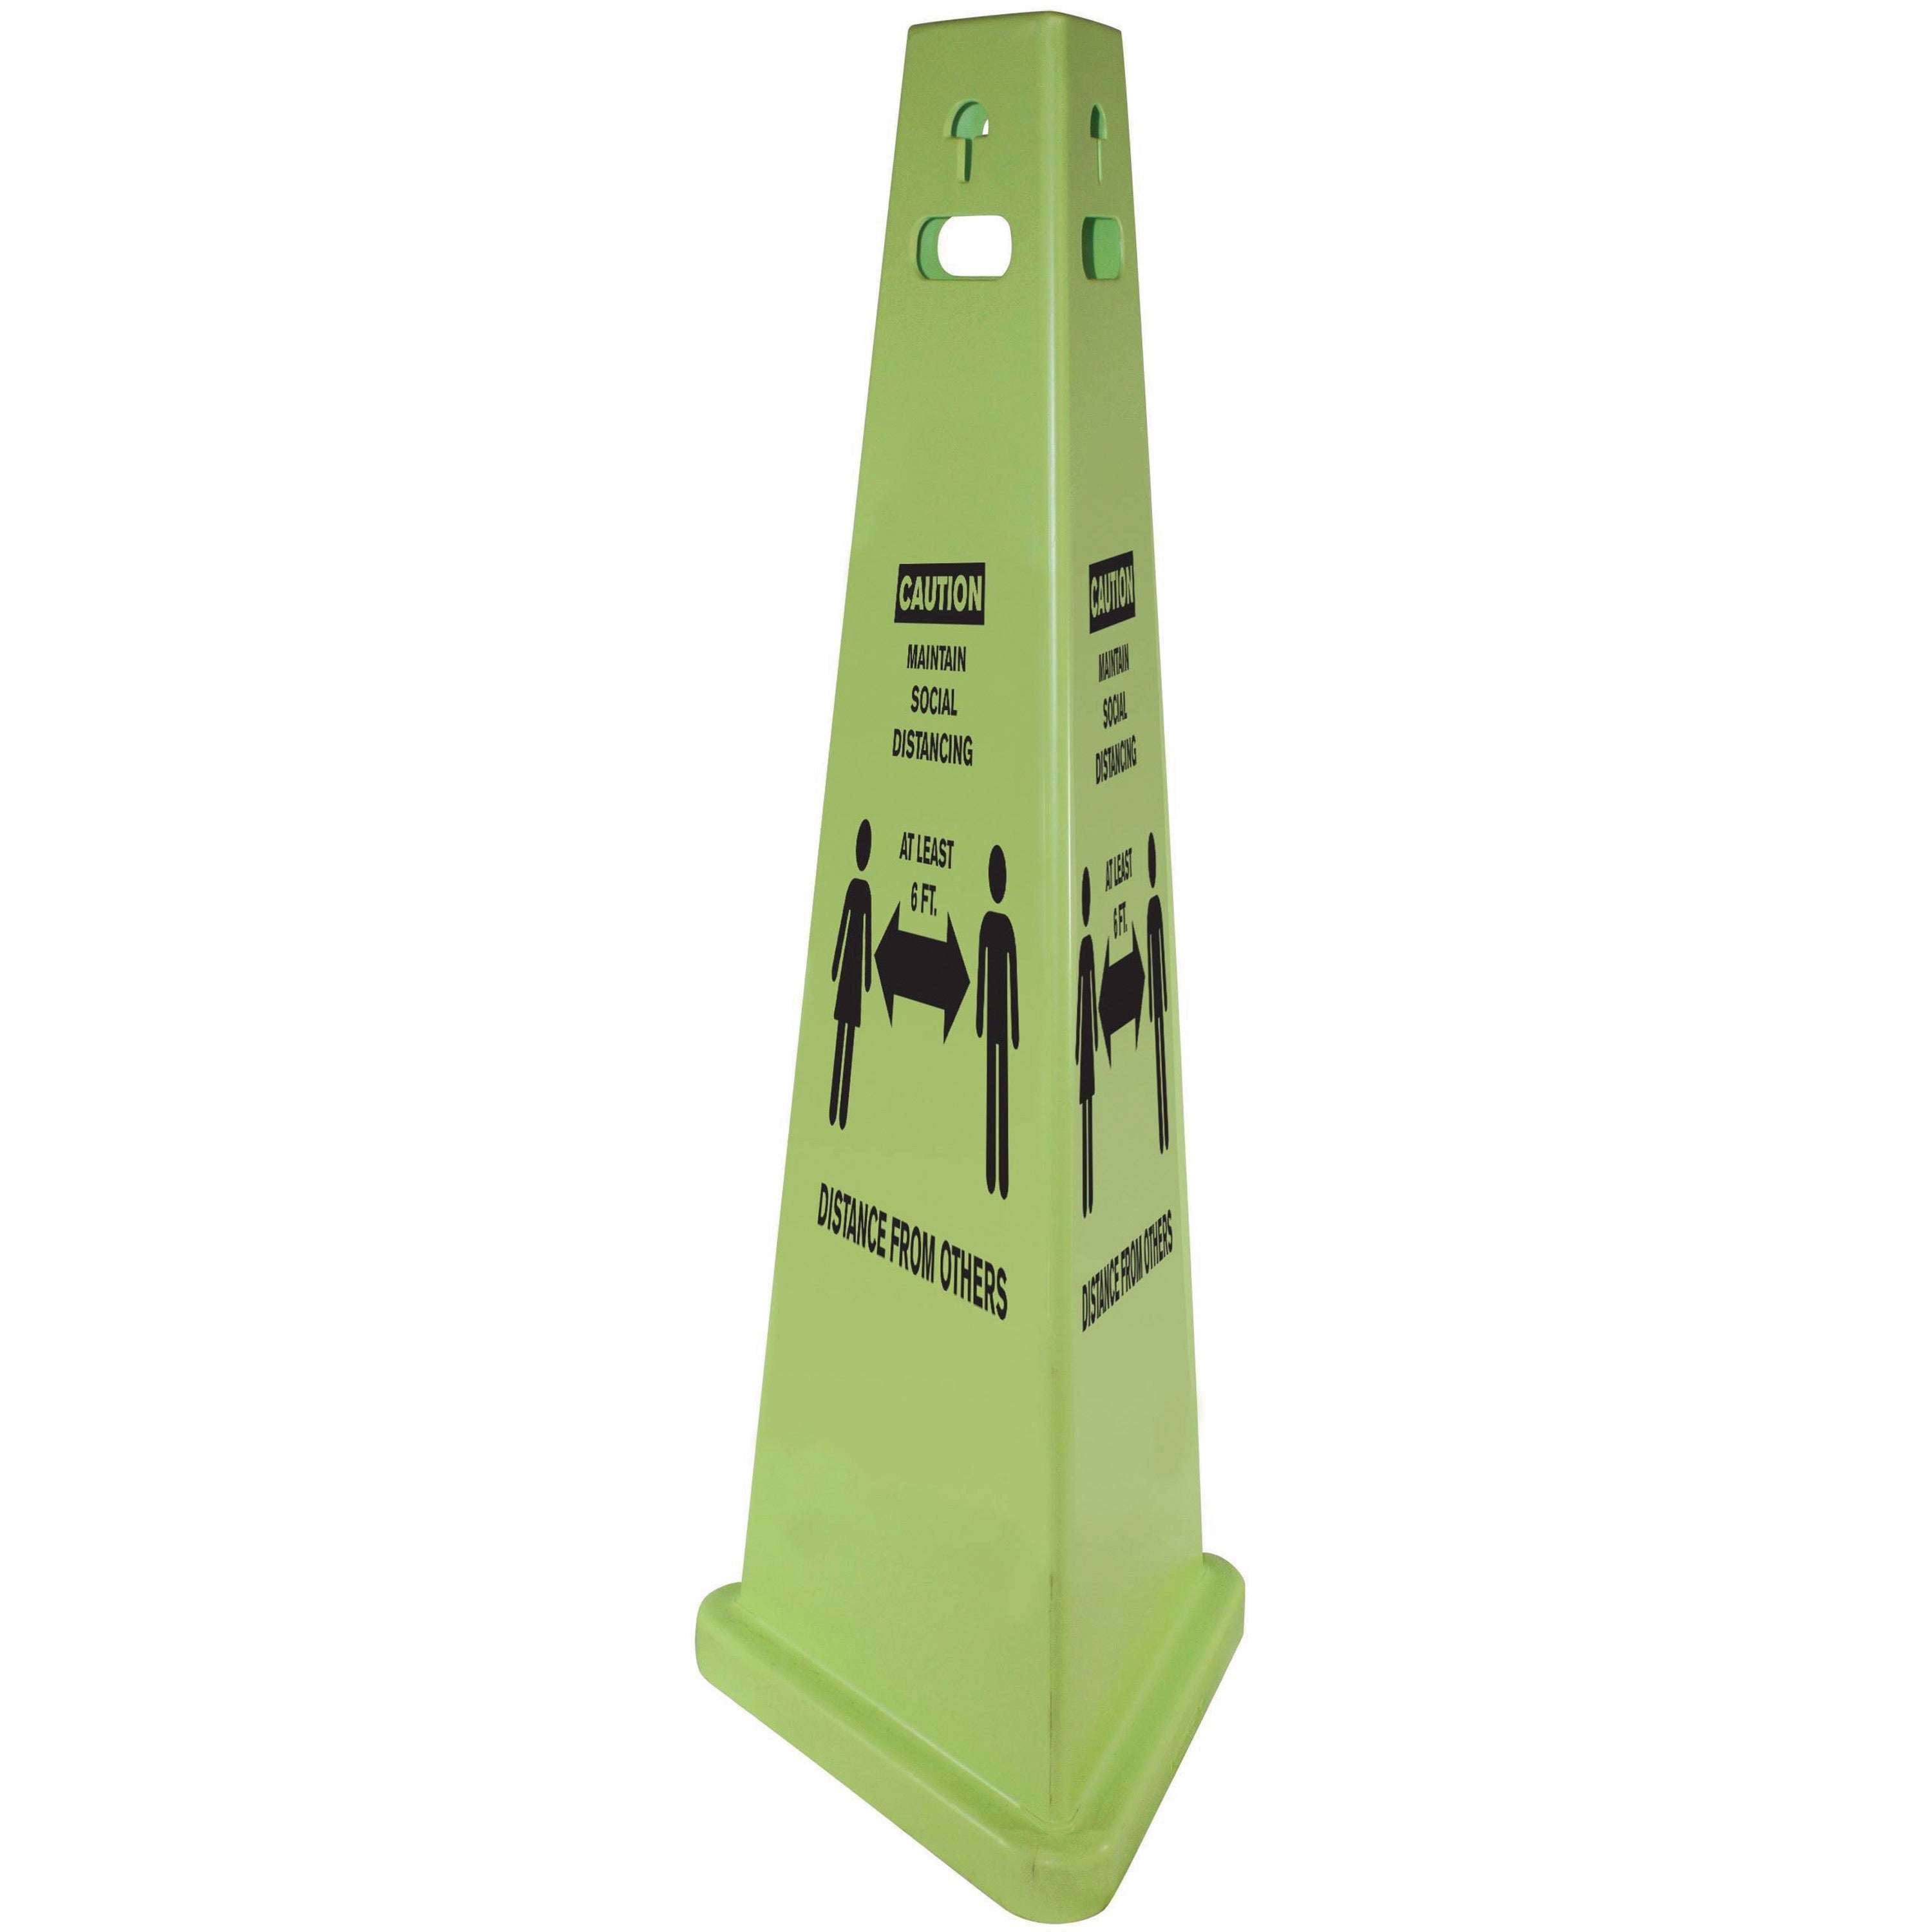 impact-trivu-social-distancing-3-sided-safety-cone-1-each-caution-maintain-social-distancing-print-message-40-height-x-148-depth-cone-shape-three-sided-uv-protected-plastic-fluorescent-yellow_imp9140sd - 1